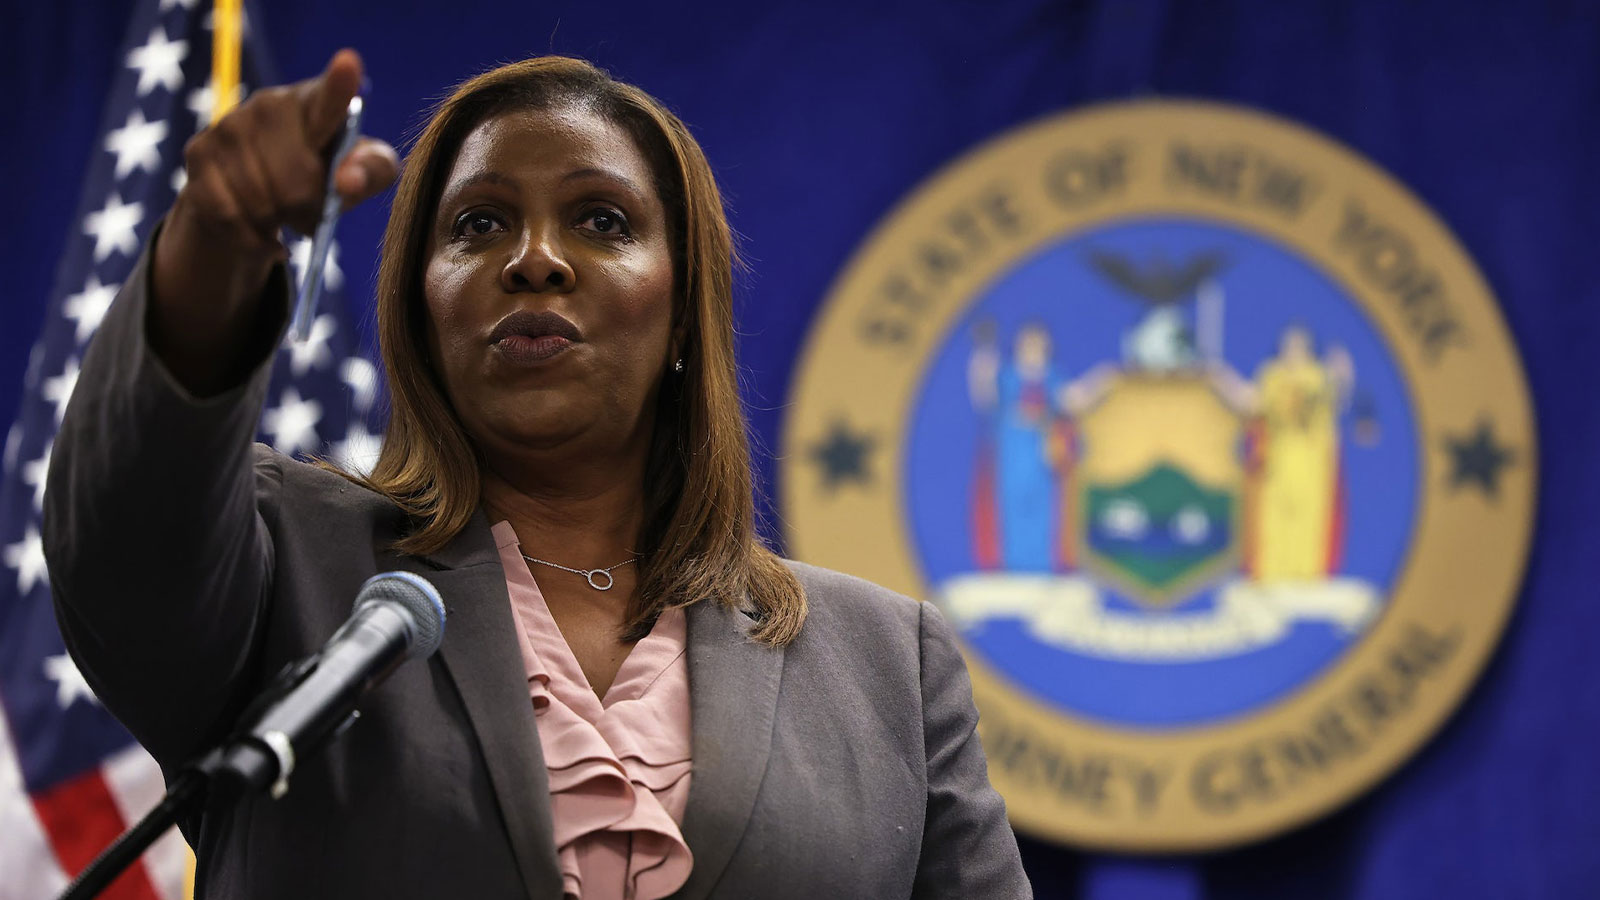 New York Attorney General Letitia James has led a probe into Donald Trump’s business practices.